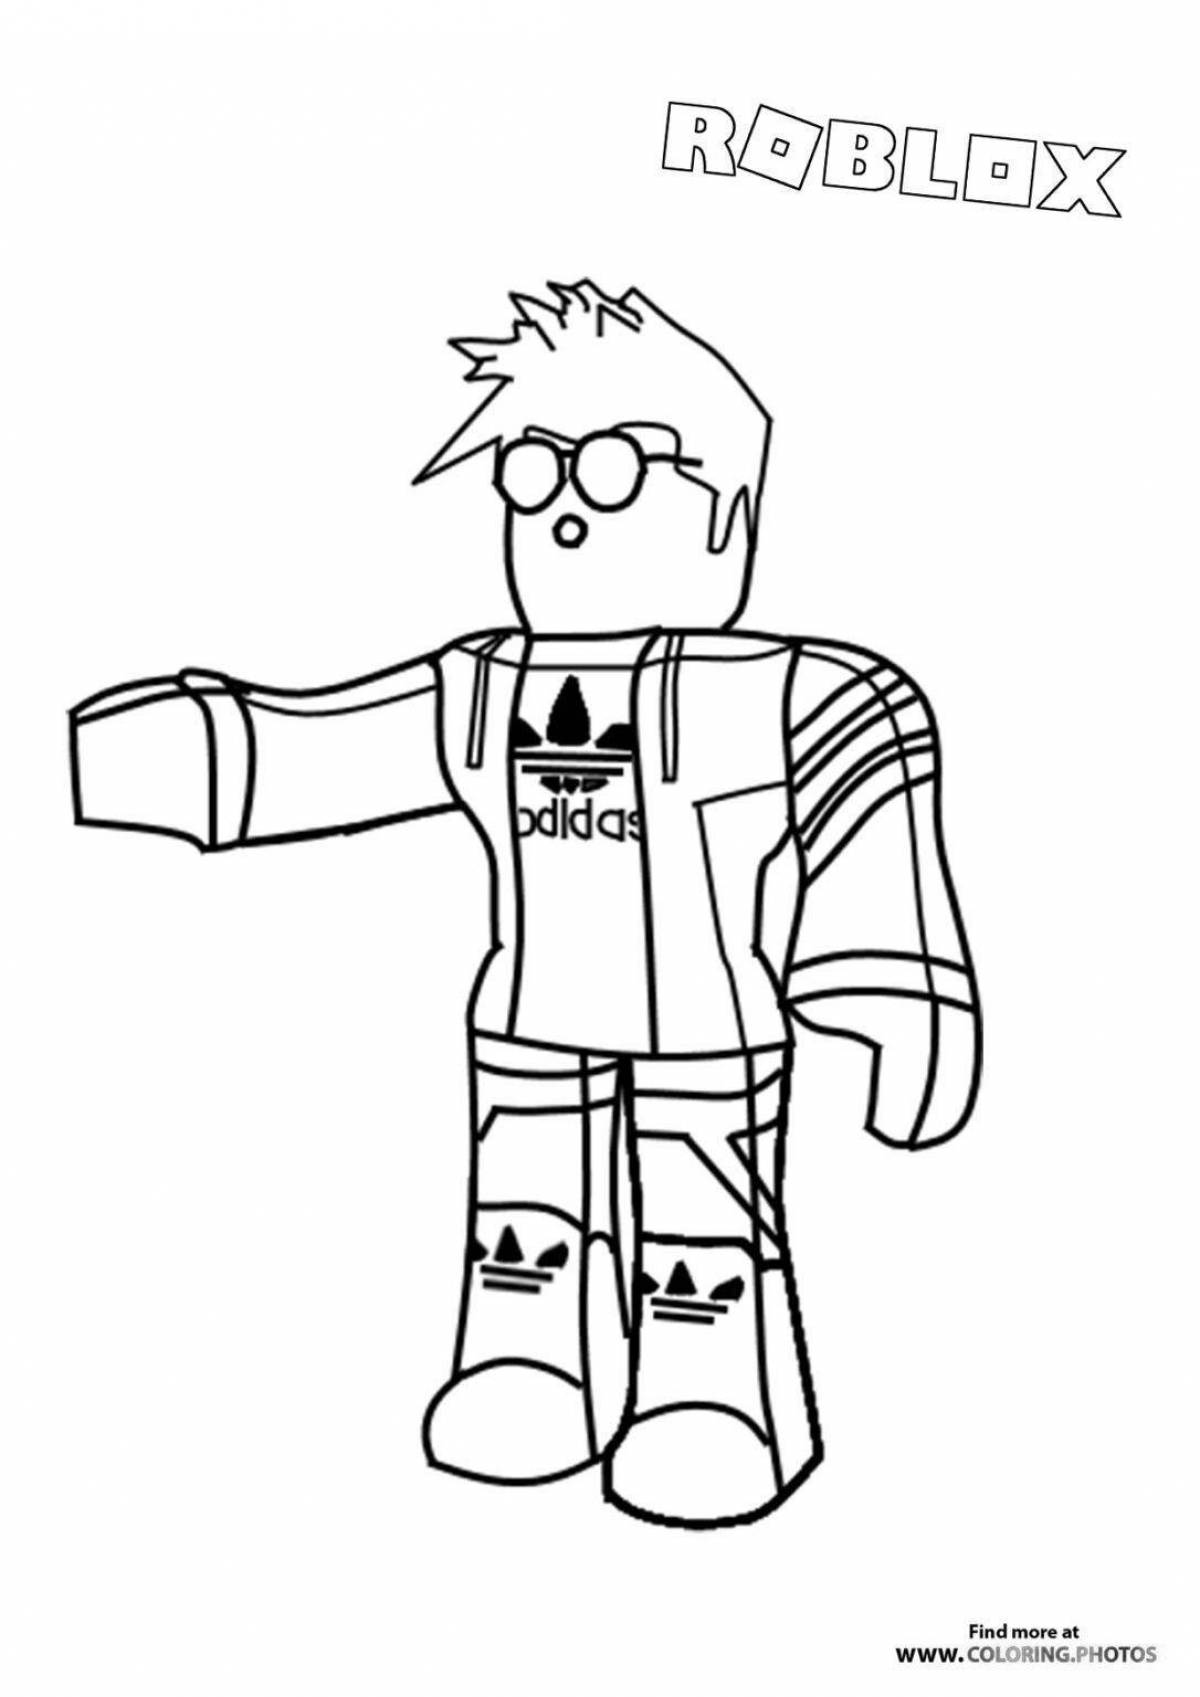 Colorful roblox coloring page by numbers